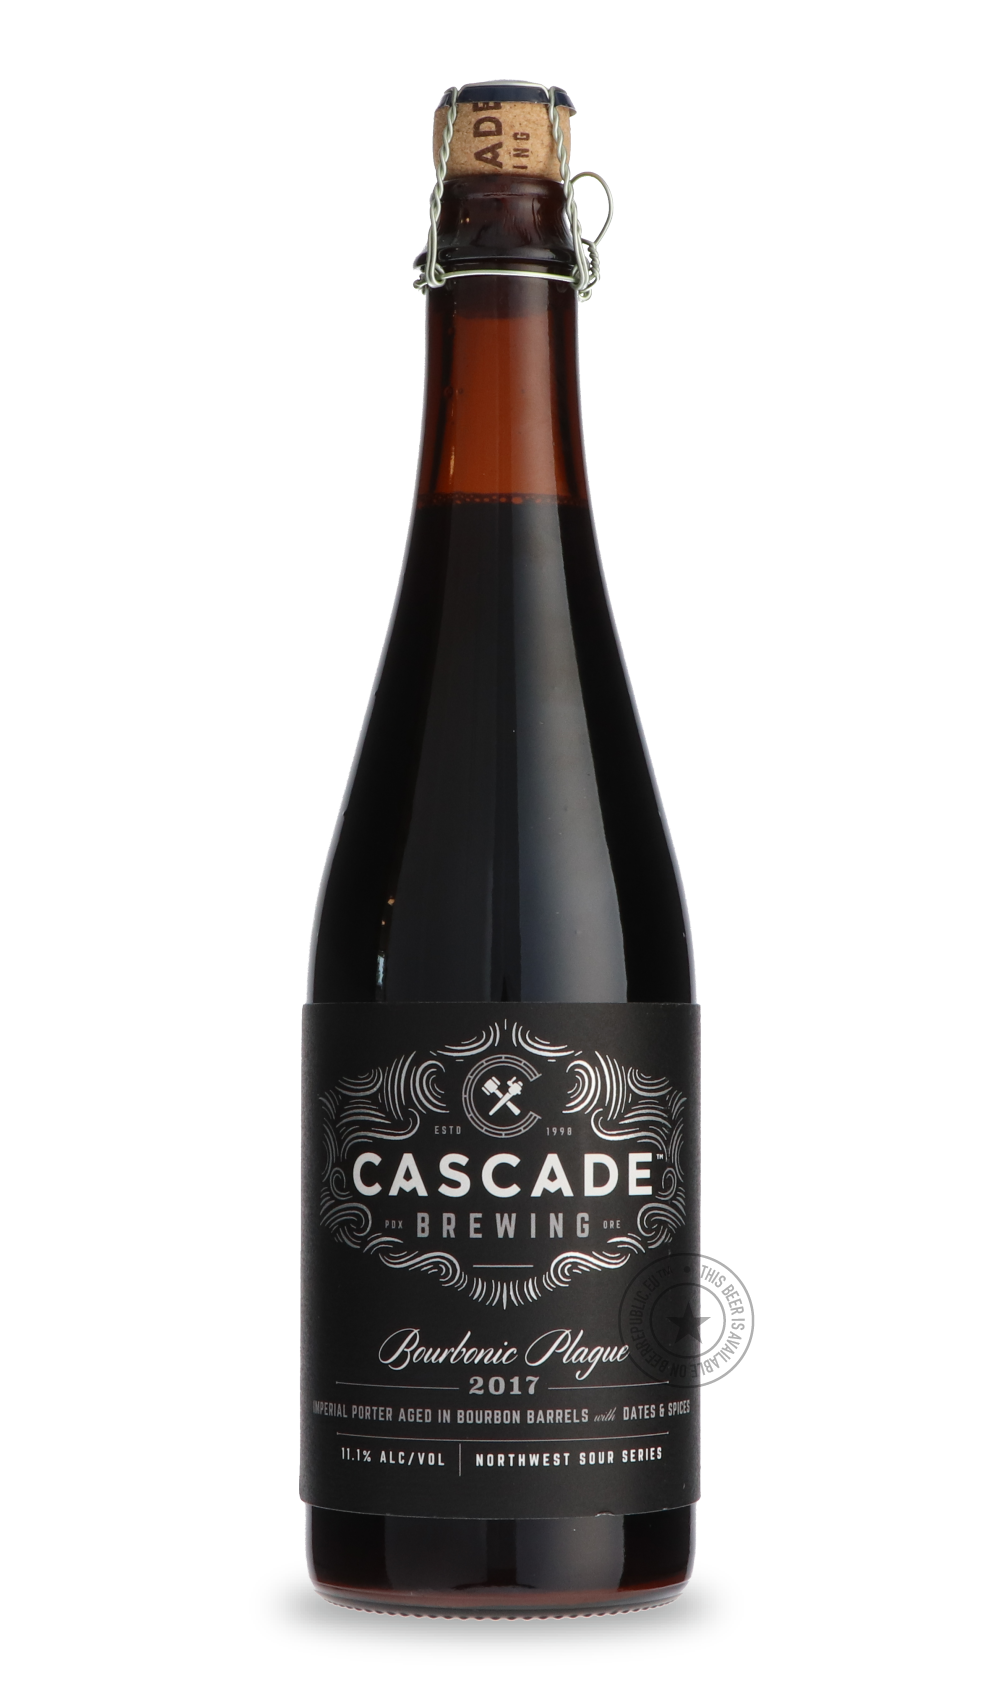 -Cascade- Bourbonic Plague-Sour / Wild & Fruity- Only @ Beer Republic - The best online beer store for American & Canadian craft beer - Buy beer online from the USA and Canada - Bier online kopen - Amerikaans bier kopen - Craft beer store - Craft beer kopen - Amerikanisch bier kaufen - Bier online kaufen - Acheter biere online - IPA - Stout - Porter - New England IPA - Hazy IPA - Imperial Stout - Barrel Aged - Barrel Aged Imperial Stout - Brown - Dark beer - Blond - Blonde - Pilsner - Lager - Wheat - Weizen